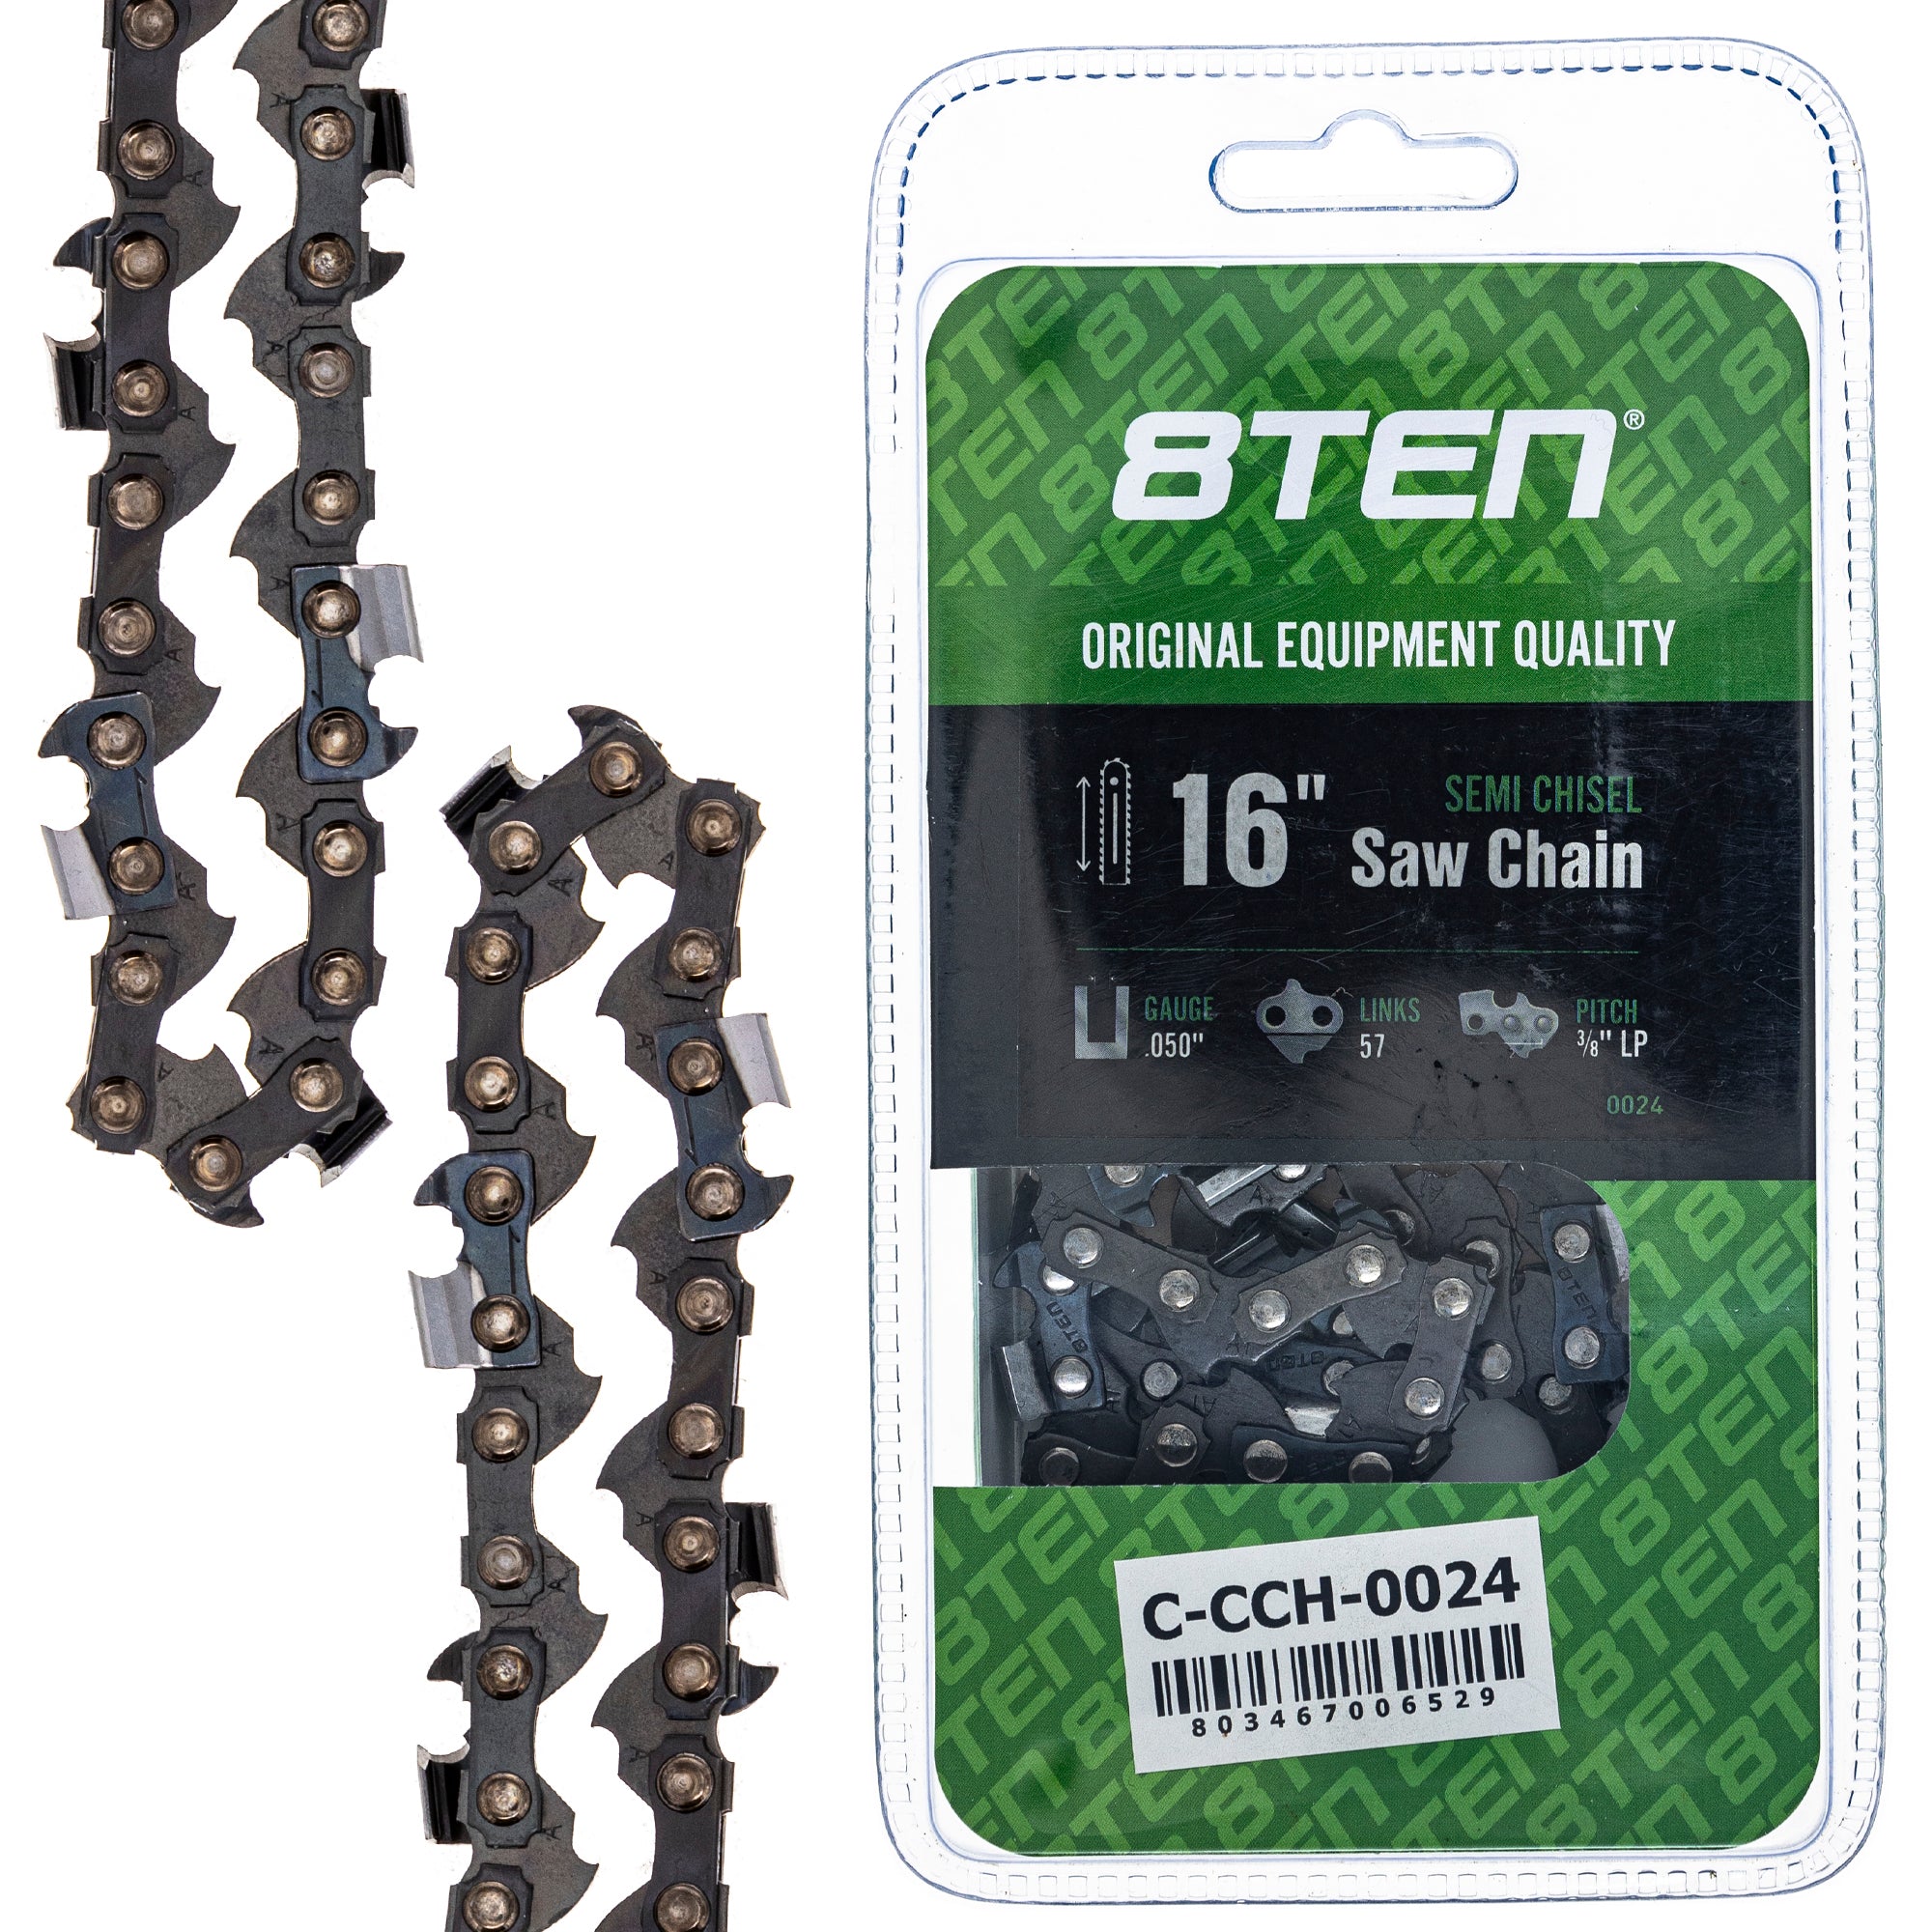 8TEN 810-CCC2246H Chain 2-Pack for zOTHER Windsor Stens Oregon GB